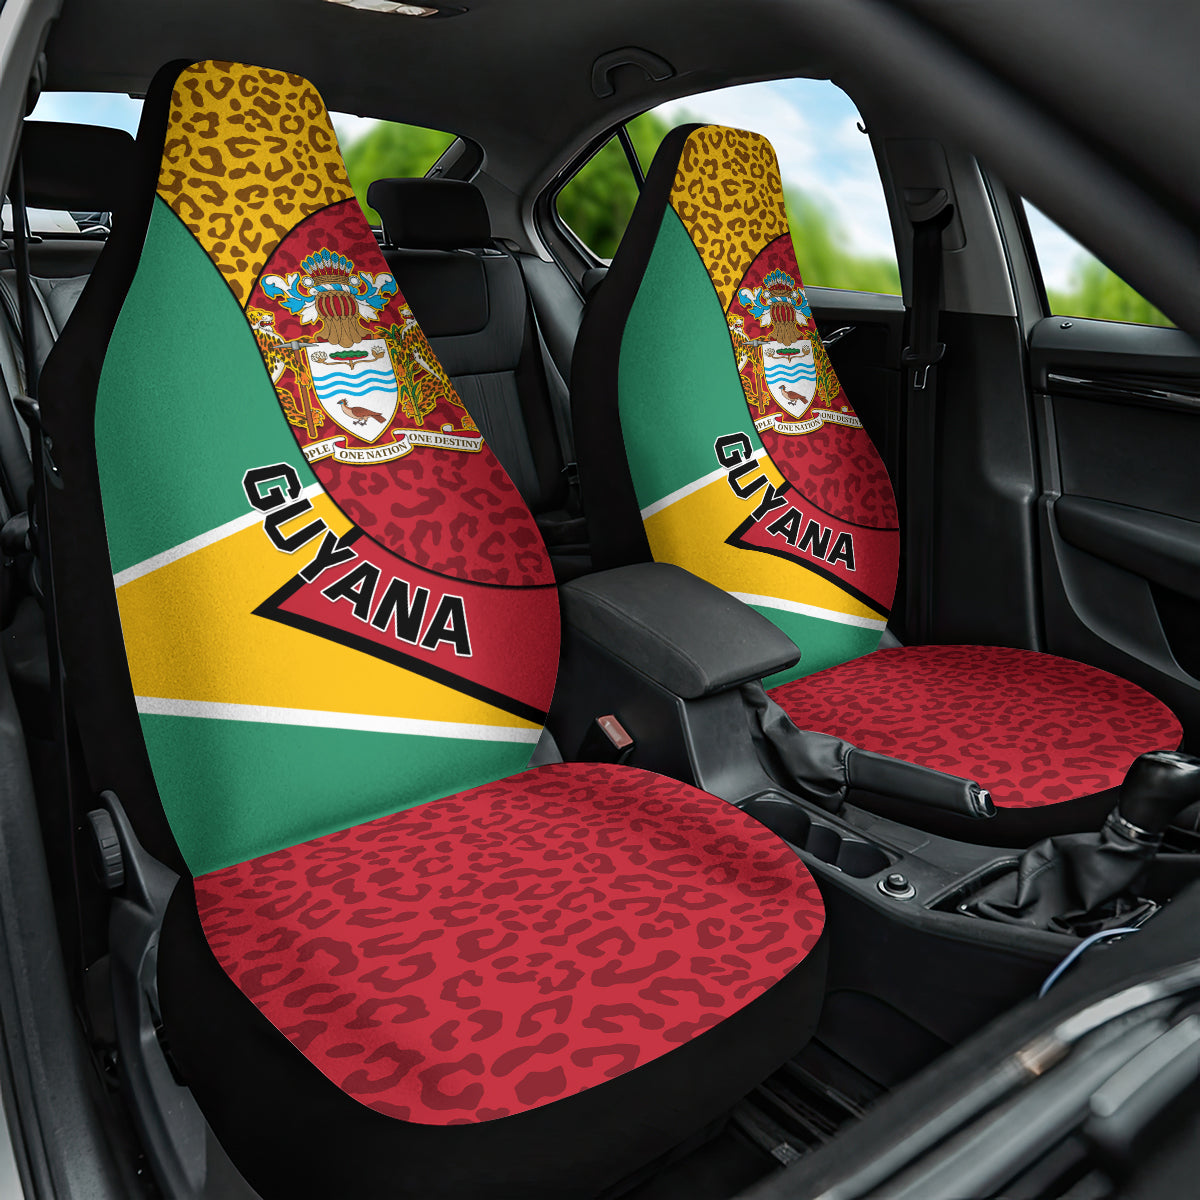 Guyana Republic Day Car Seat Cover Coat Of Arms Leopard Pattern